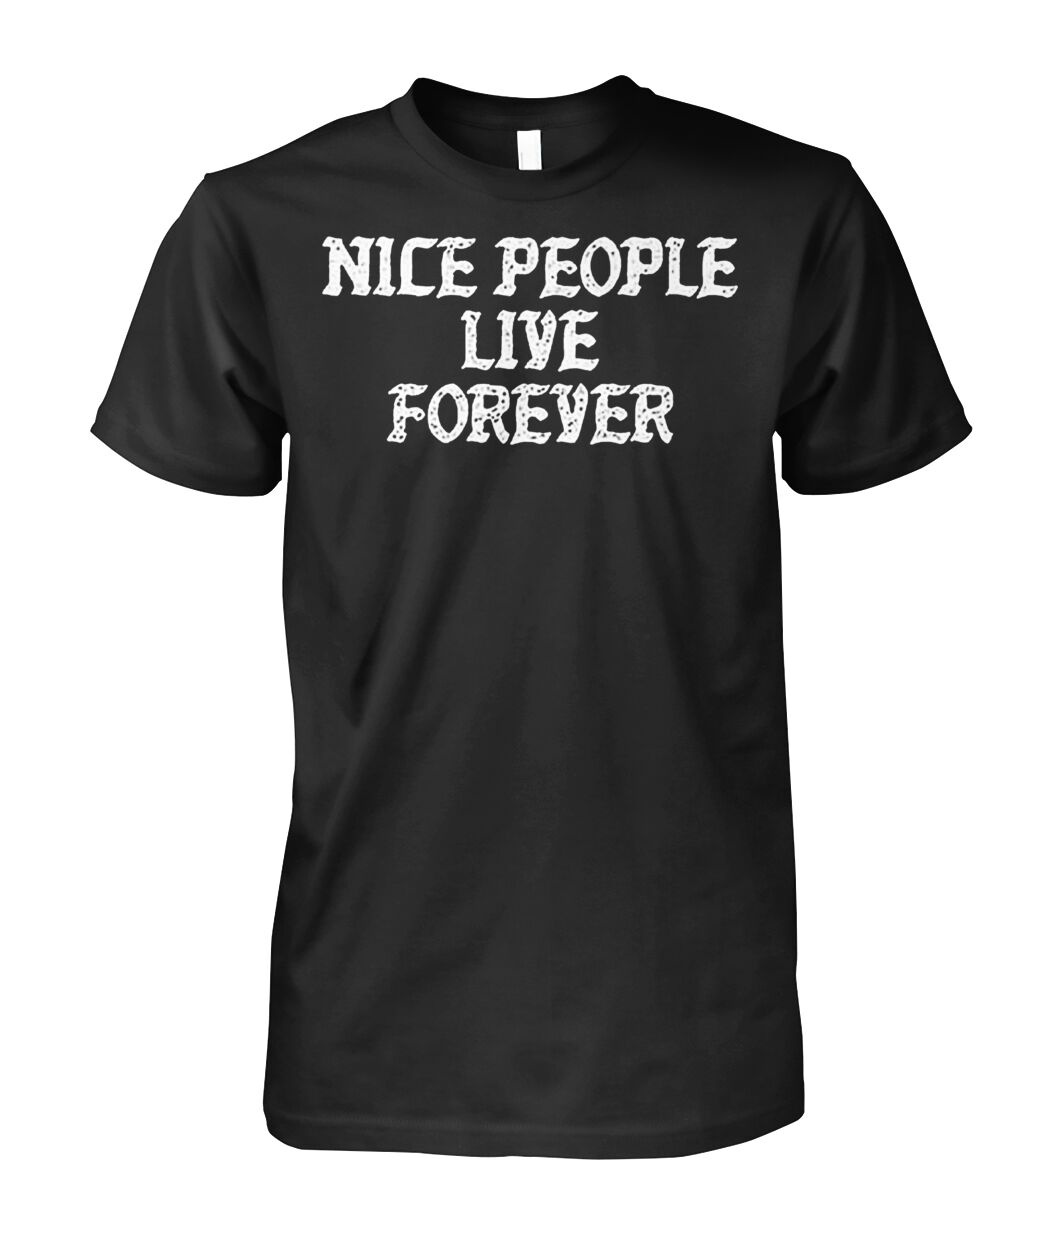 Nice People Live Forever Shirt